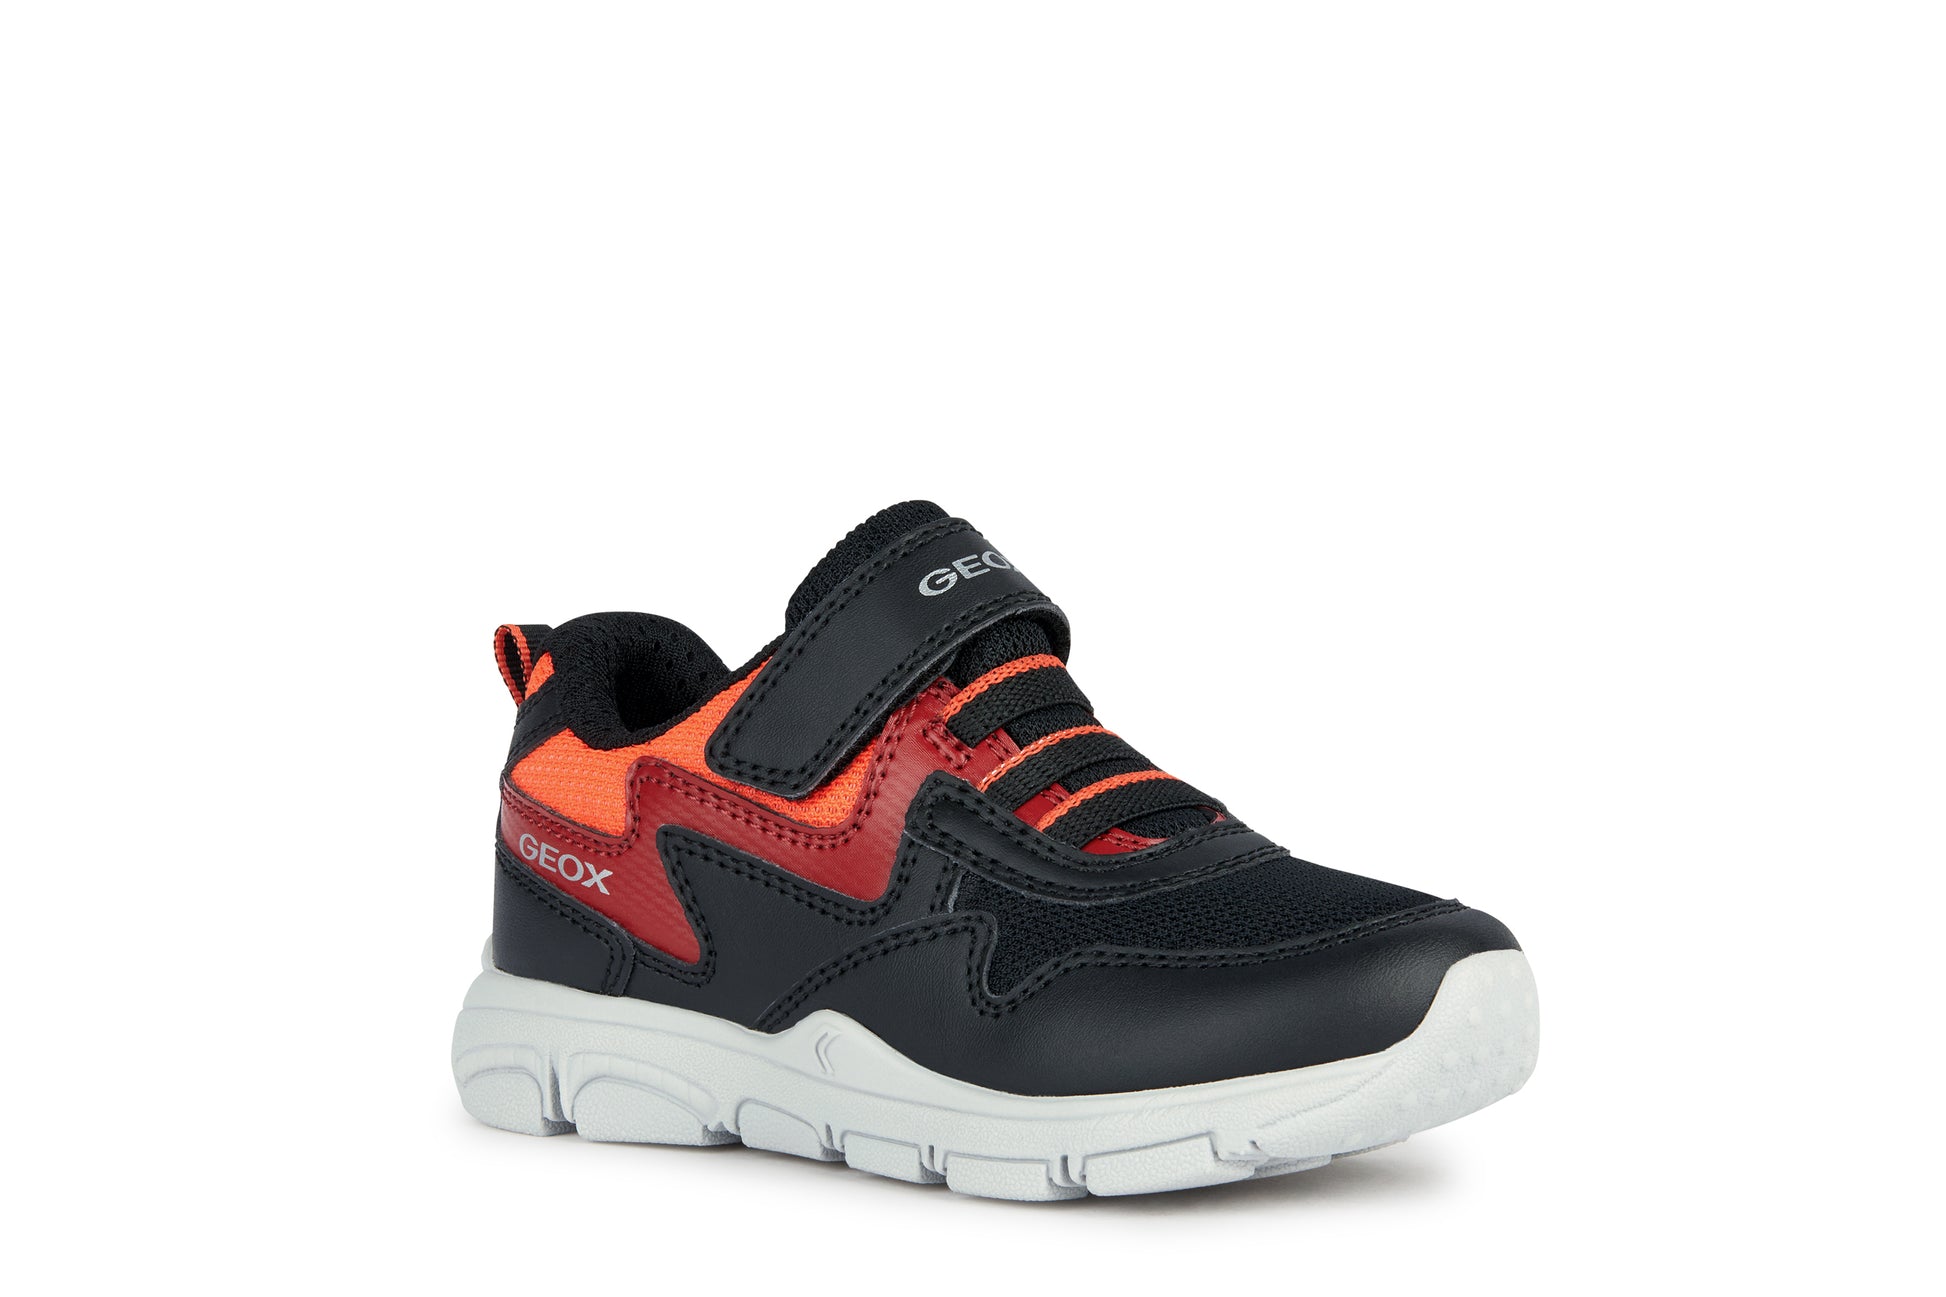 A boys trainer by Geox, style New Torque, in black, red and orange with a velcro strap and bungee laces. Angled view.